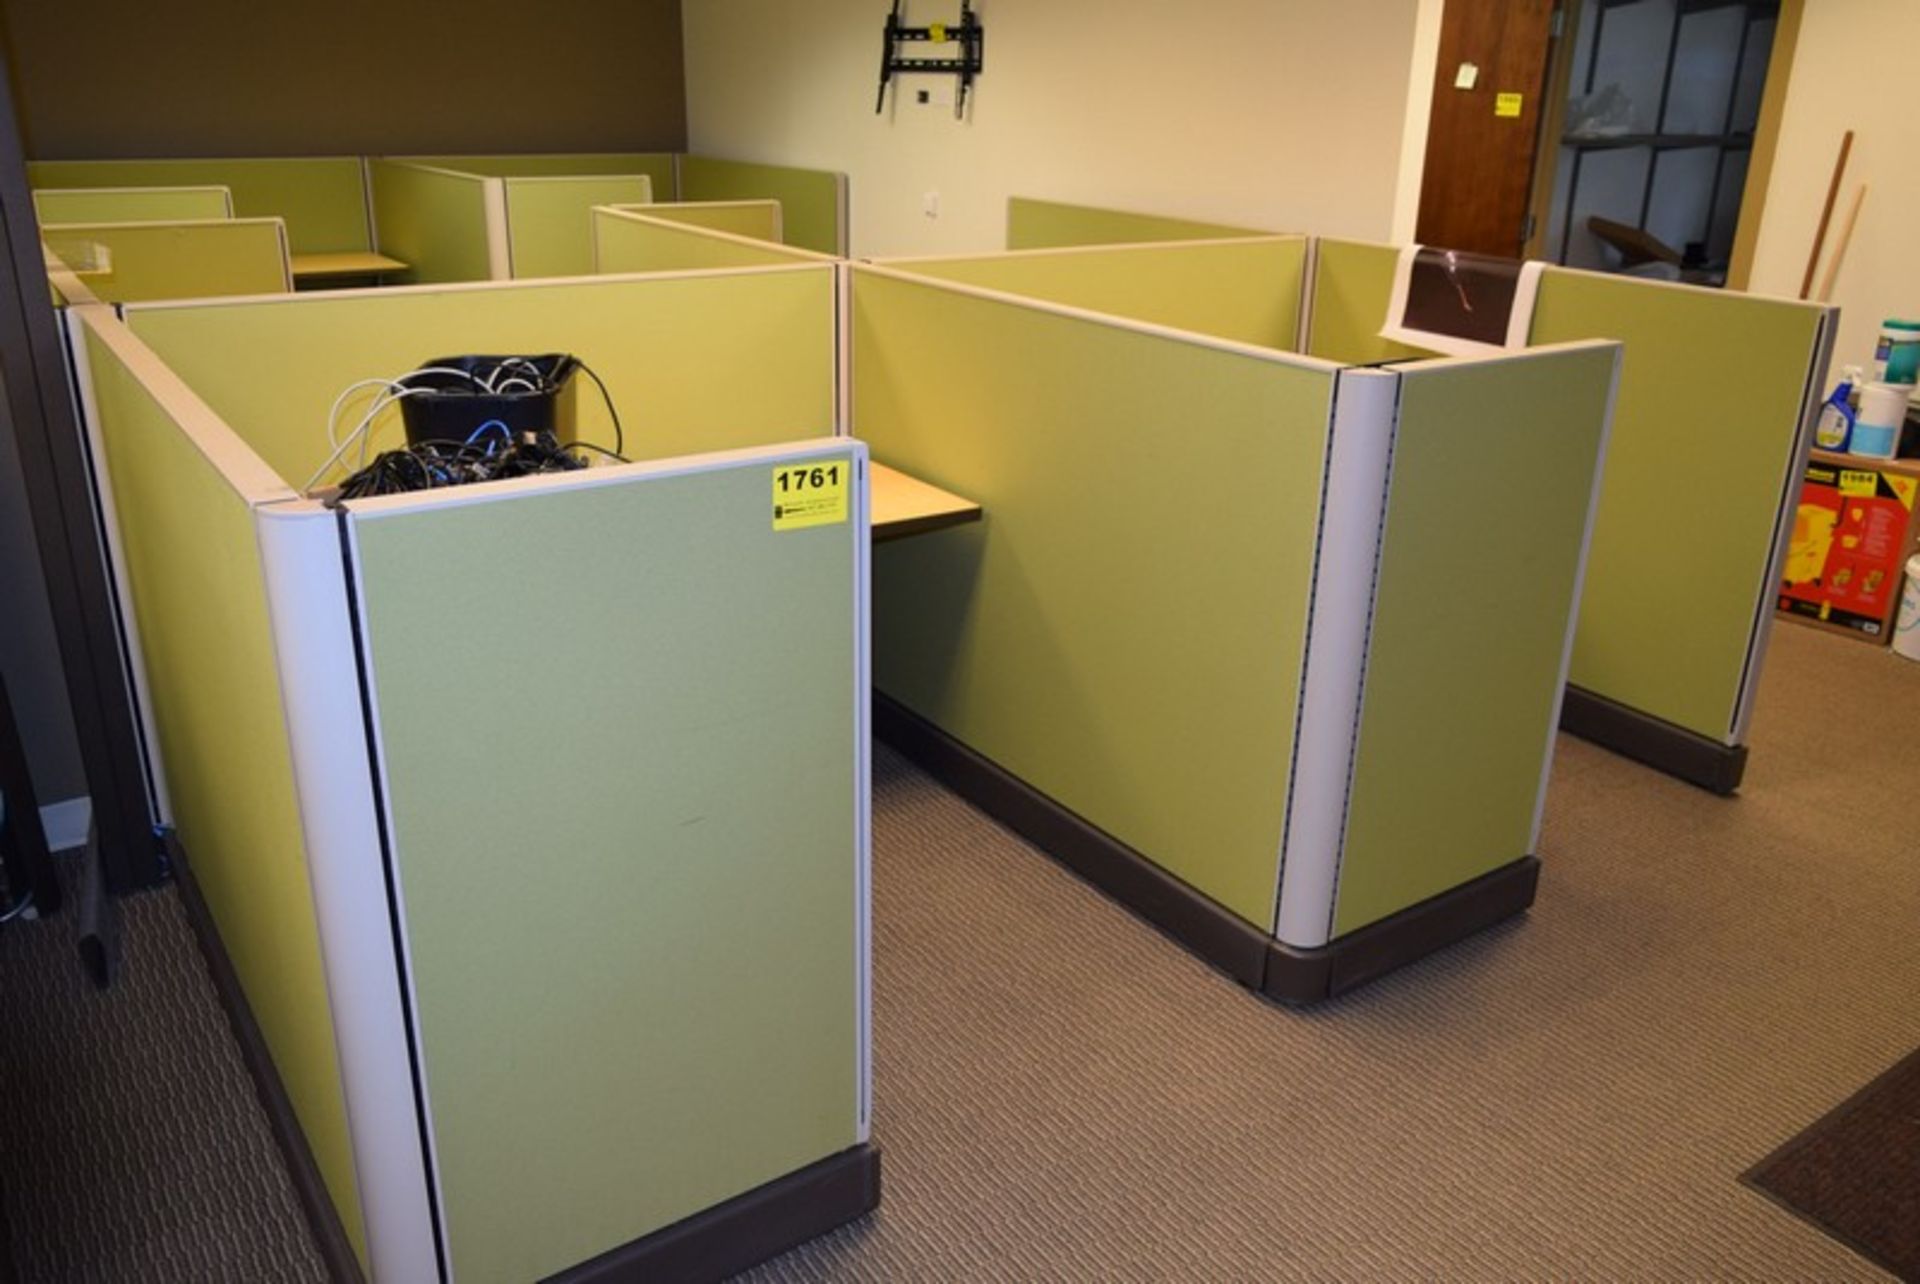 LOT: (4) 60" X 62" X 46.5" METAL FRAME CLOTH UPHOLSTERED POWERED OFFICE CUBICLE PARTITIONS W/ L-